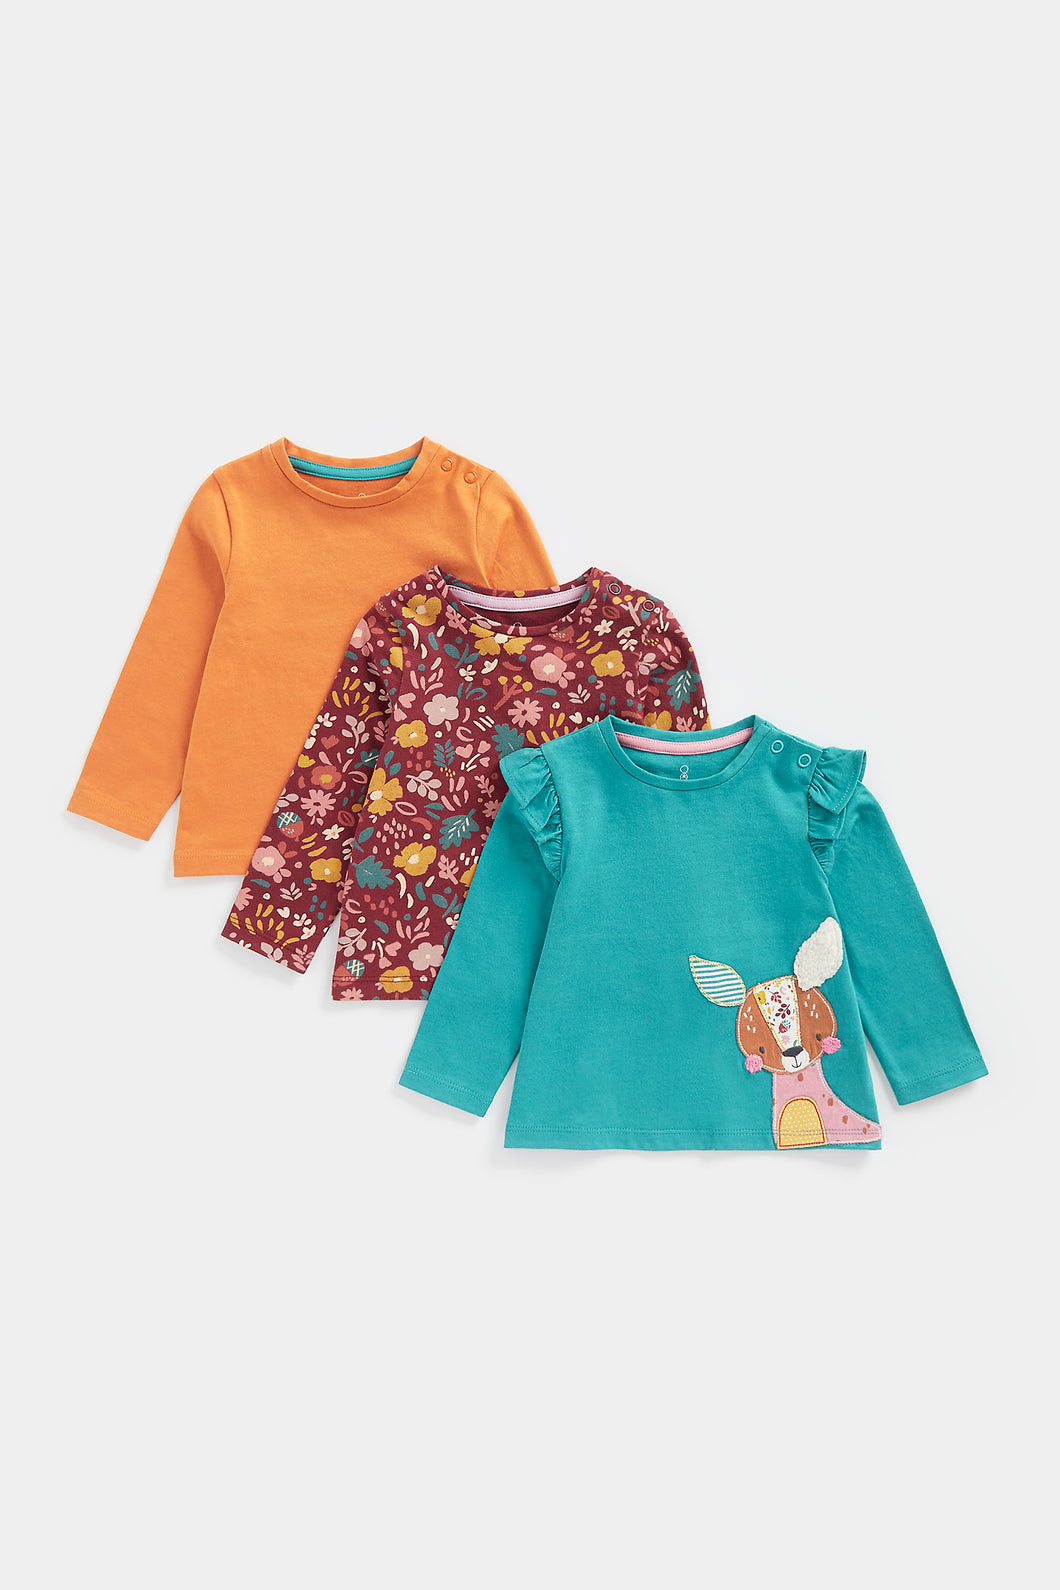 Mothercare Woodland Long-Sleeved T-Shirts - 3 Pack